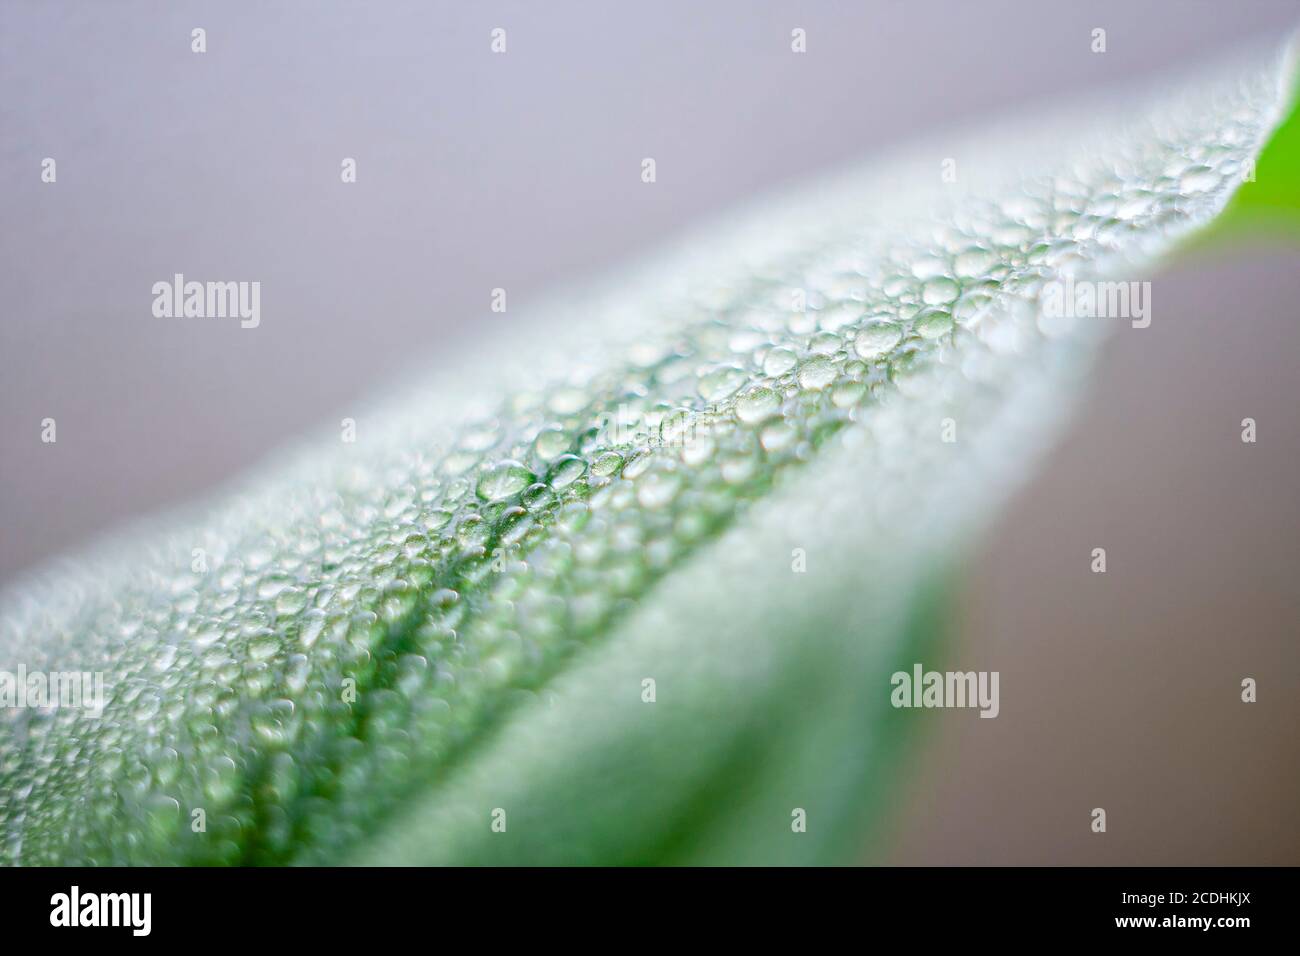 Close-up of drops on the leaves. Houseplants. Selective focus Stock Photo